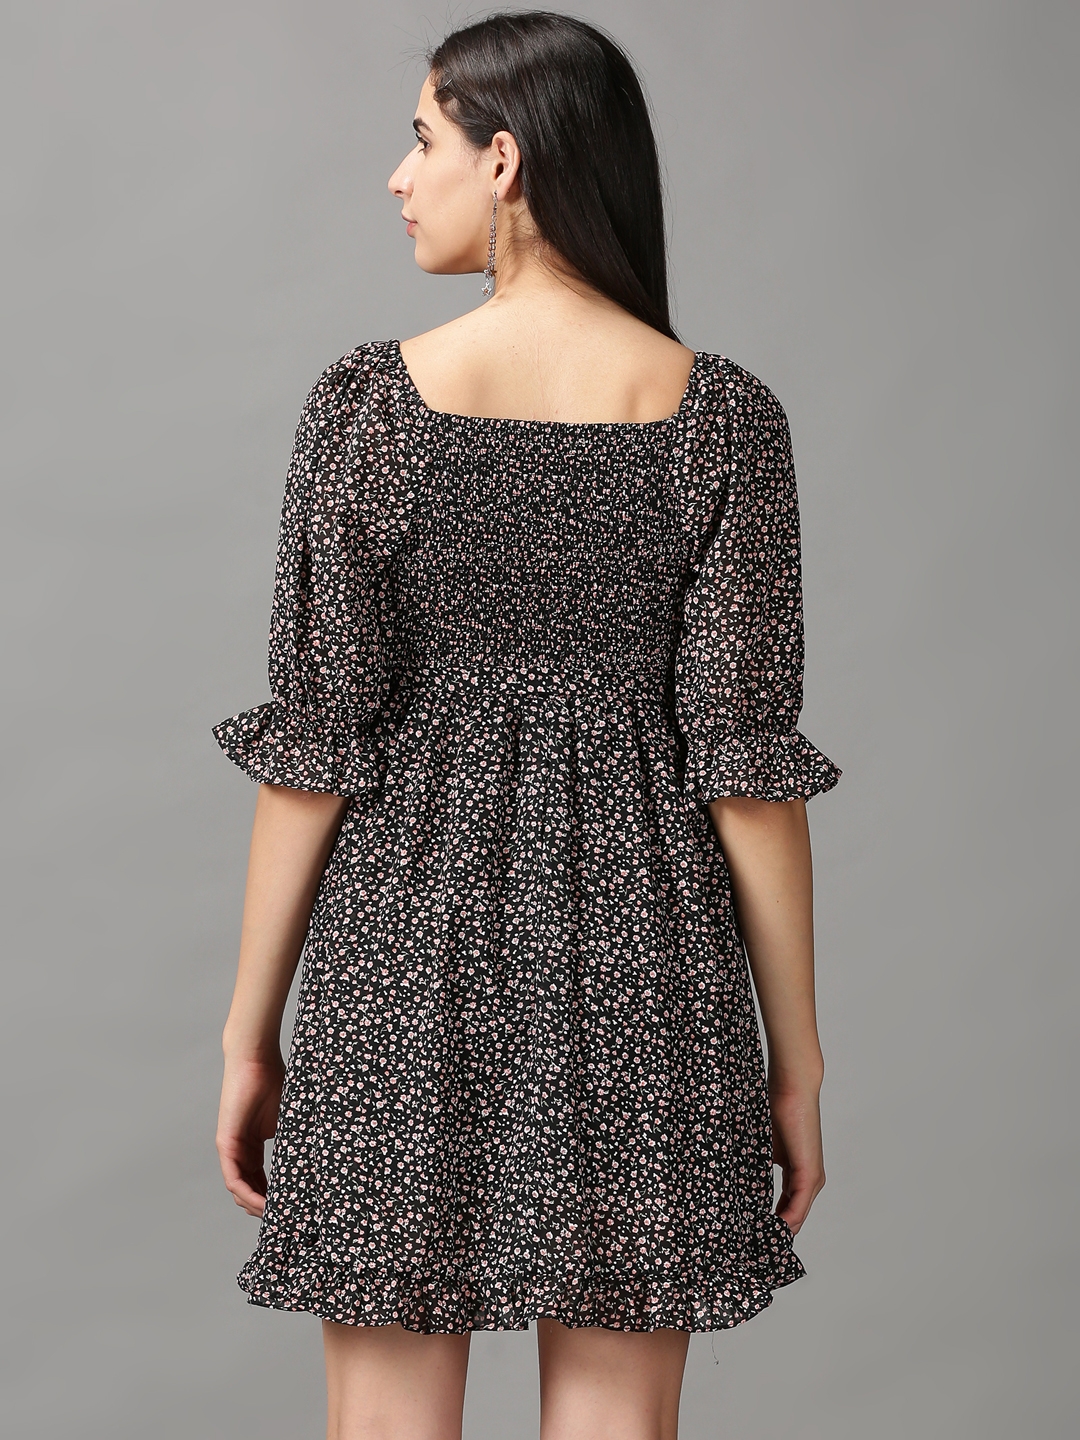 Showoff | SHOWOFF Women Black Printed Square Neck Three-Quarter Sleeves Above Knee Fit and Flare Dress 3